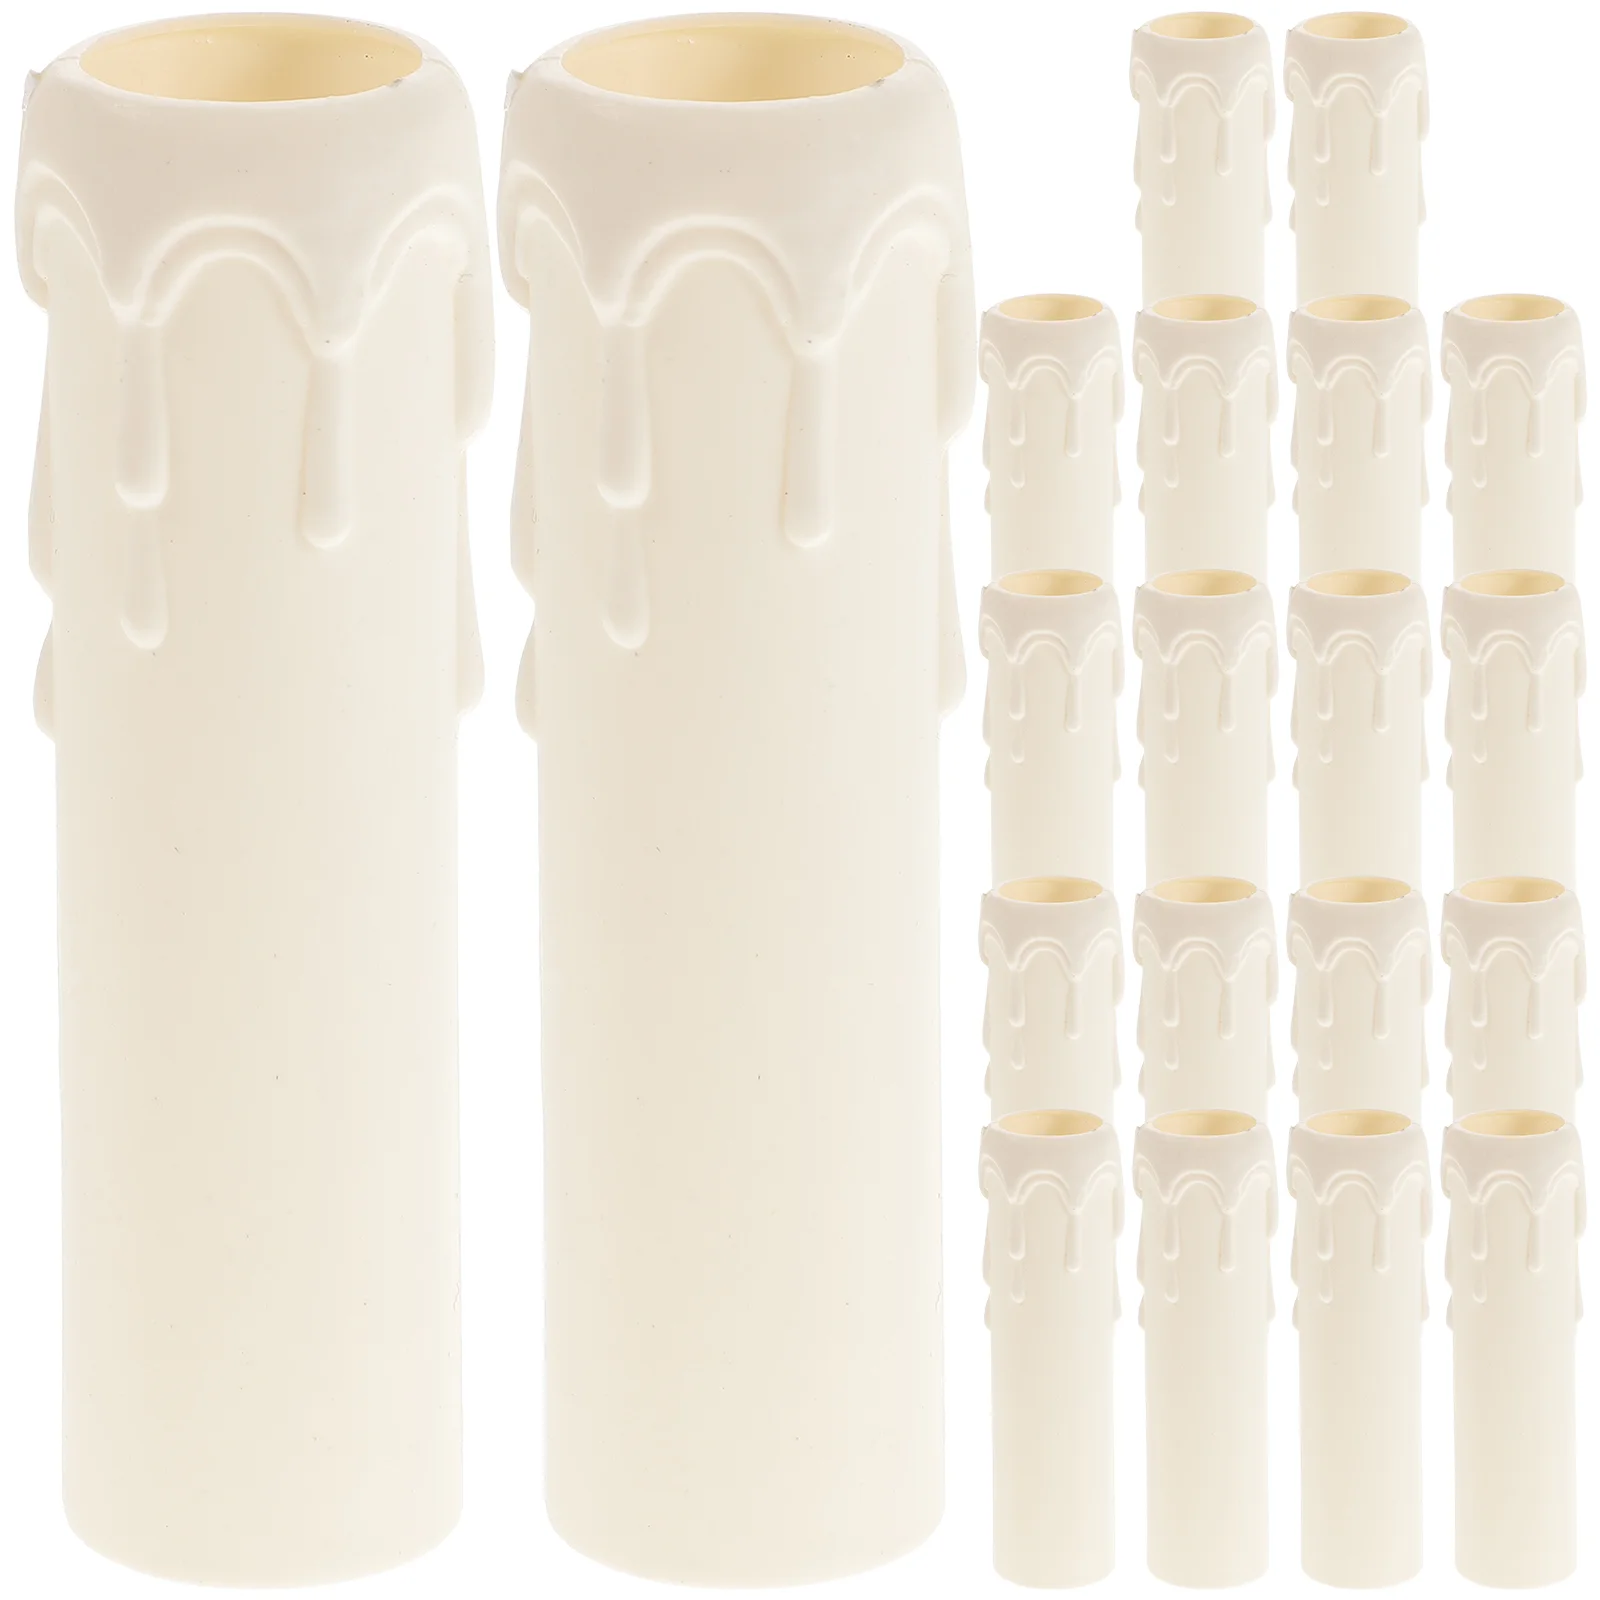 20 Pcs Tears Sleeves Socket Tubes Chandelier Covers Durable Casings Ceiling Decor Plastic Holders Tubular Creative pz0 5 16 crimping tool gt copper en ve connector 0 25 2 5 crimp pliers for cable end sleeves special tube tubular terminal clamp